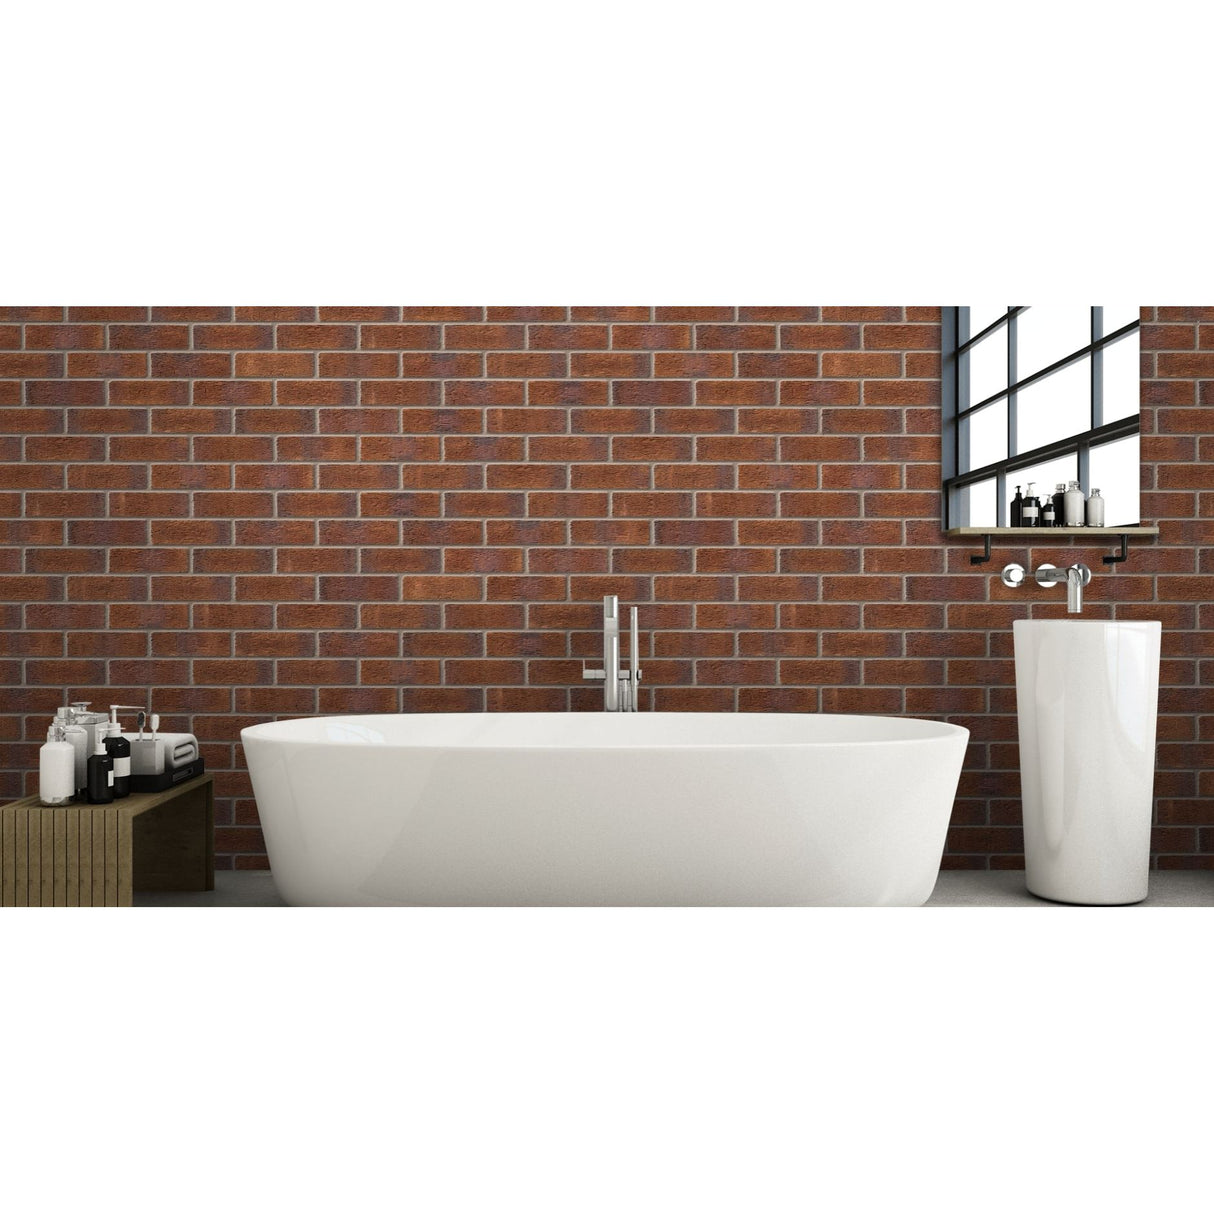 Ibstock New Burntwood Red Rustic Brick 65mm and 73mm